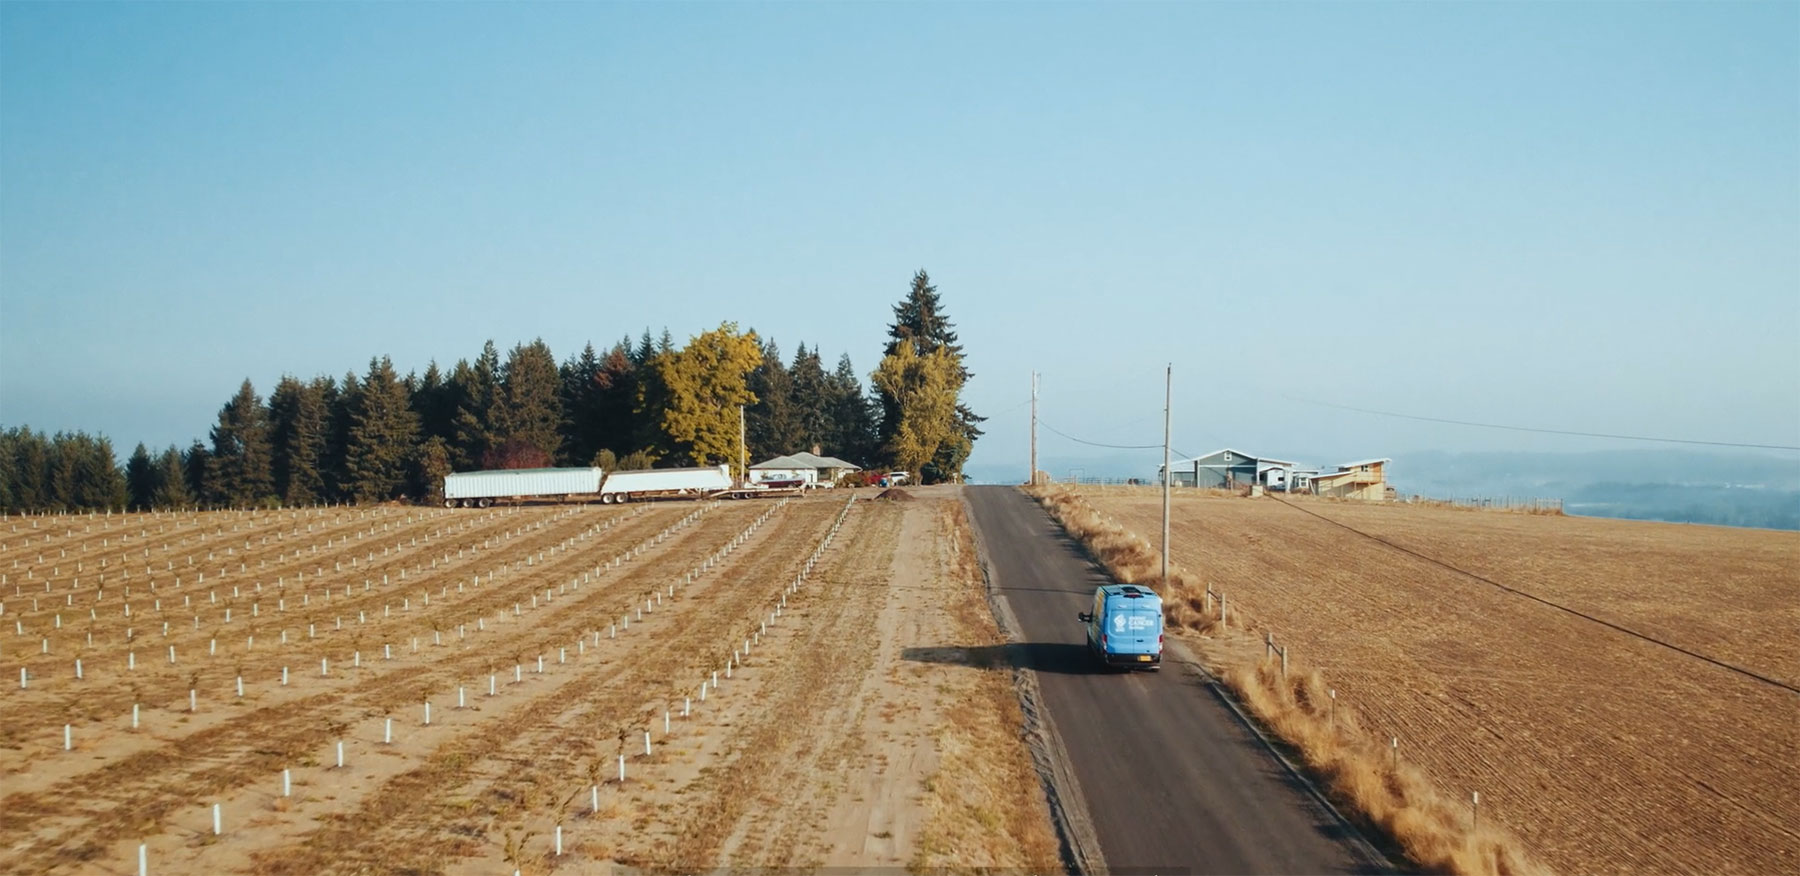 Knight Cancer Institute's outreach van drives past farms in rural Oregon